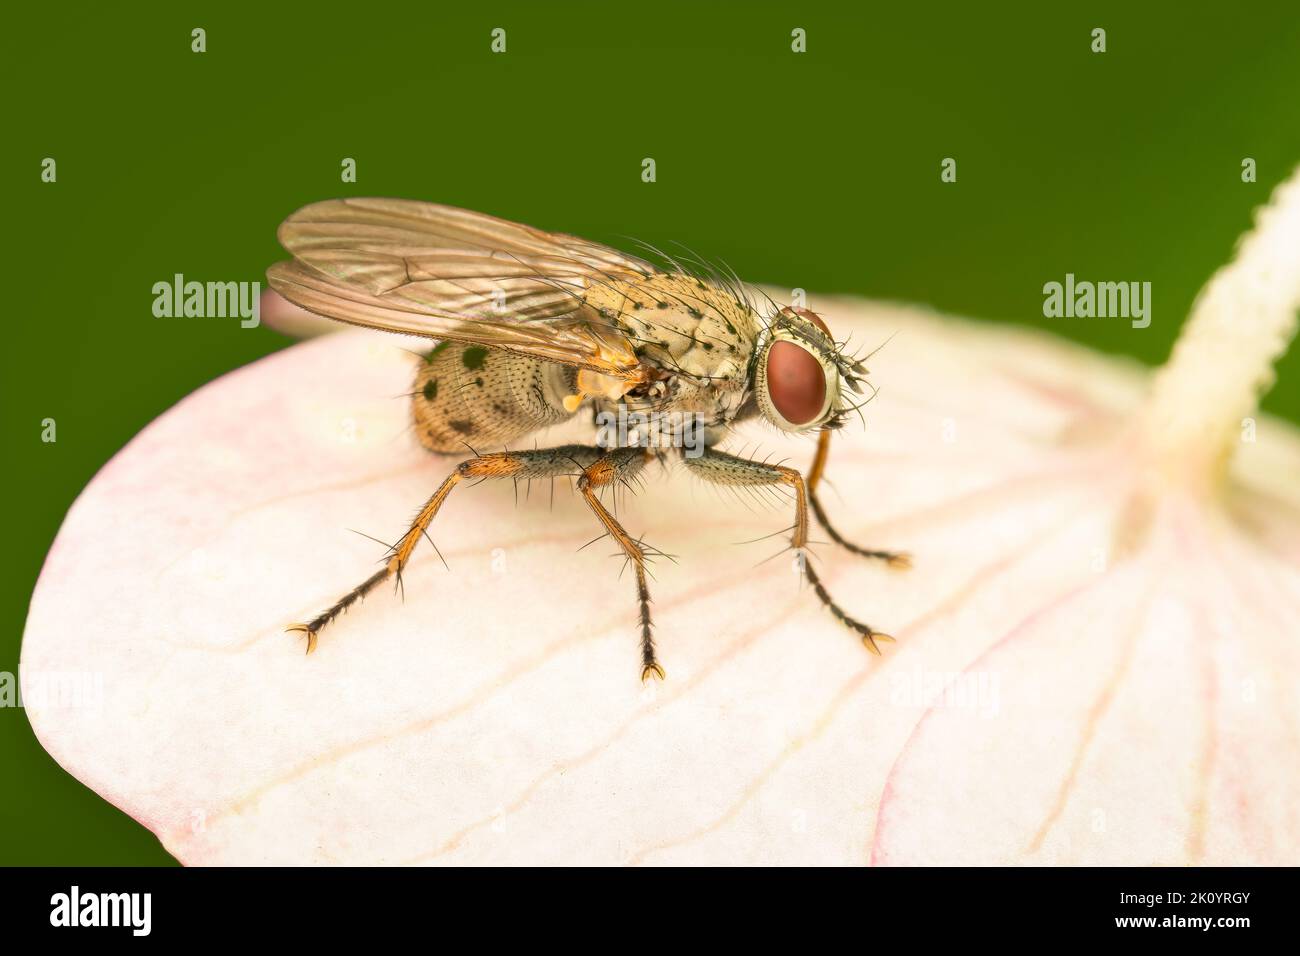 Small muscidae fly resting on a white hydrangea flower Stock Photo